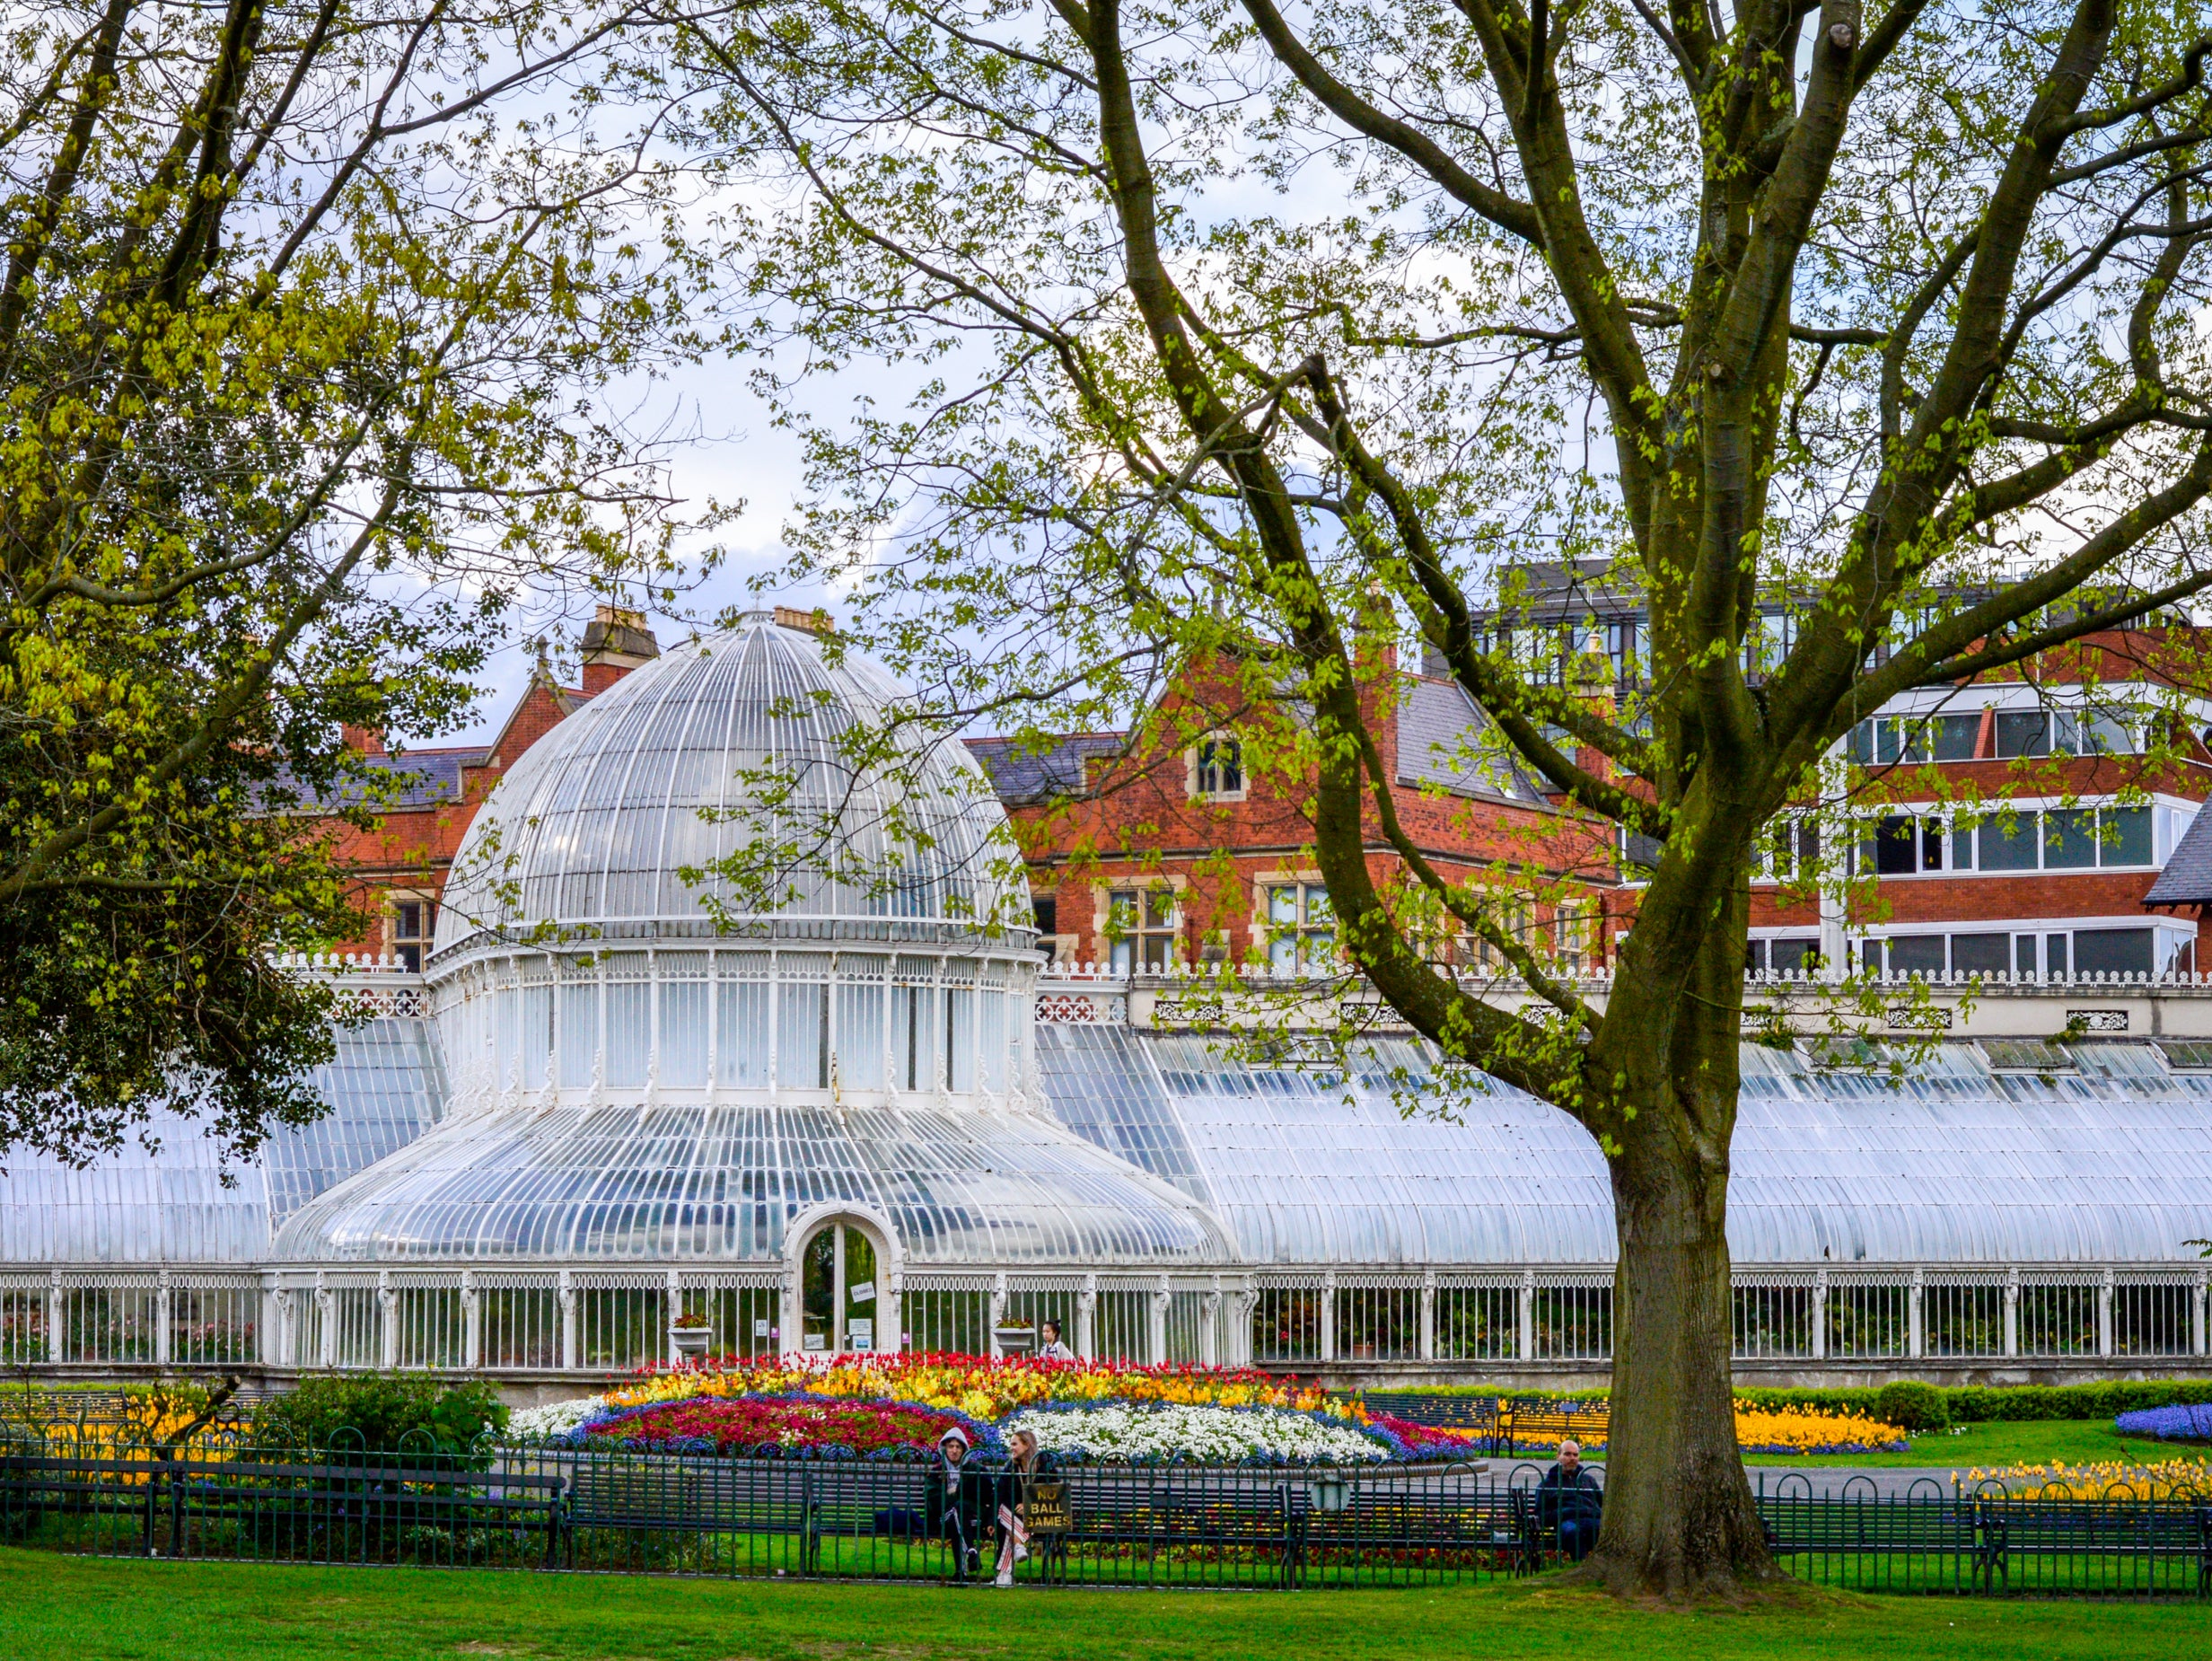 Belfast’s Botanic Gardens play host to the Ulster Museum and Palm House